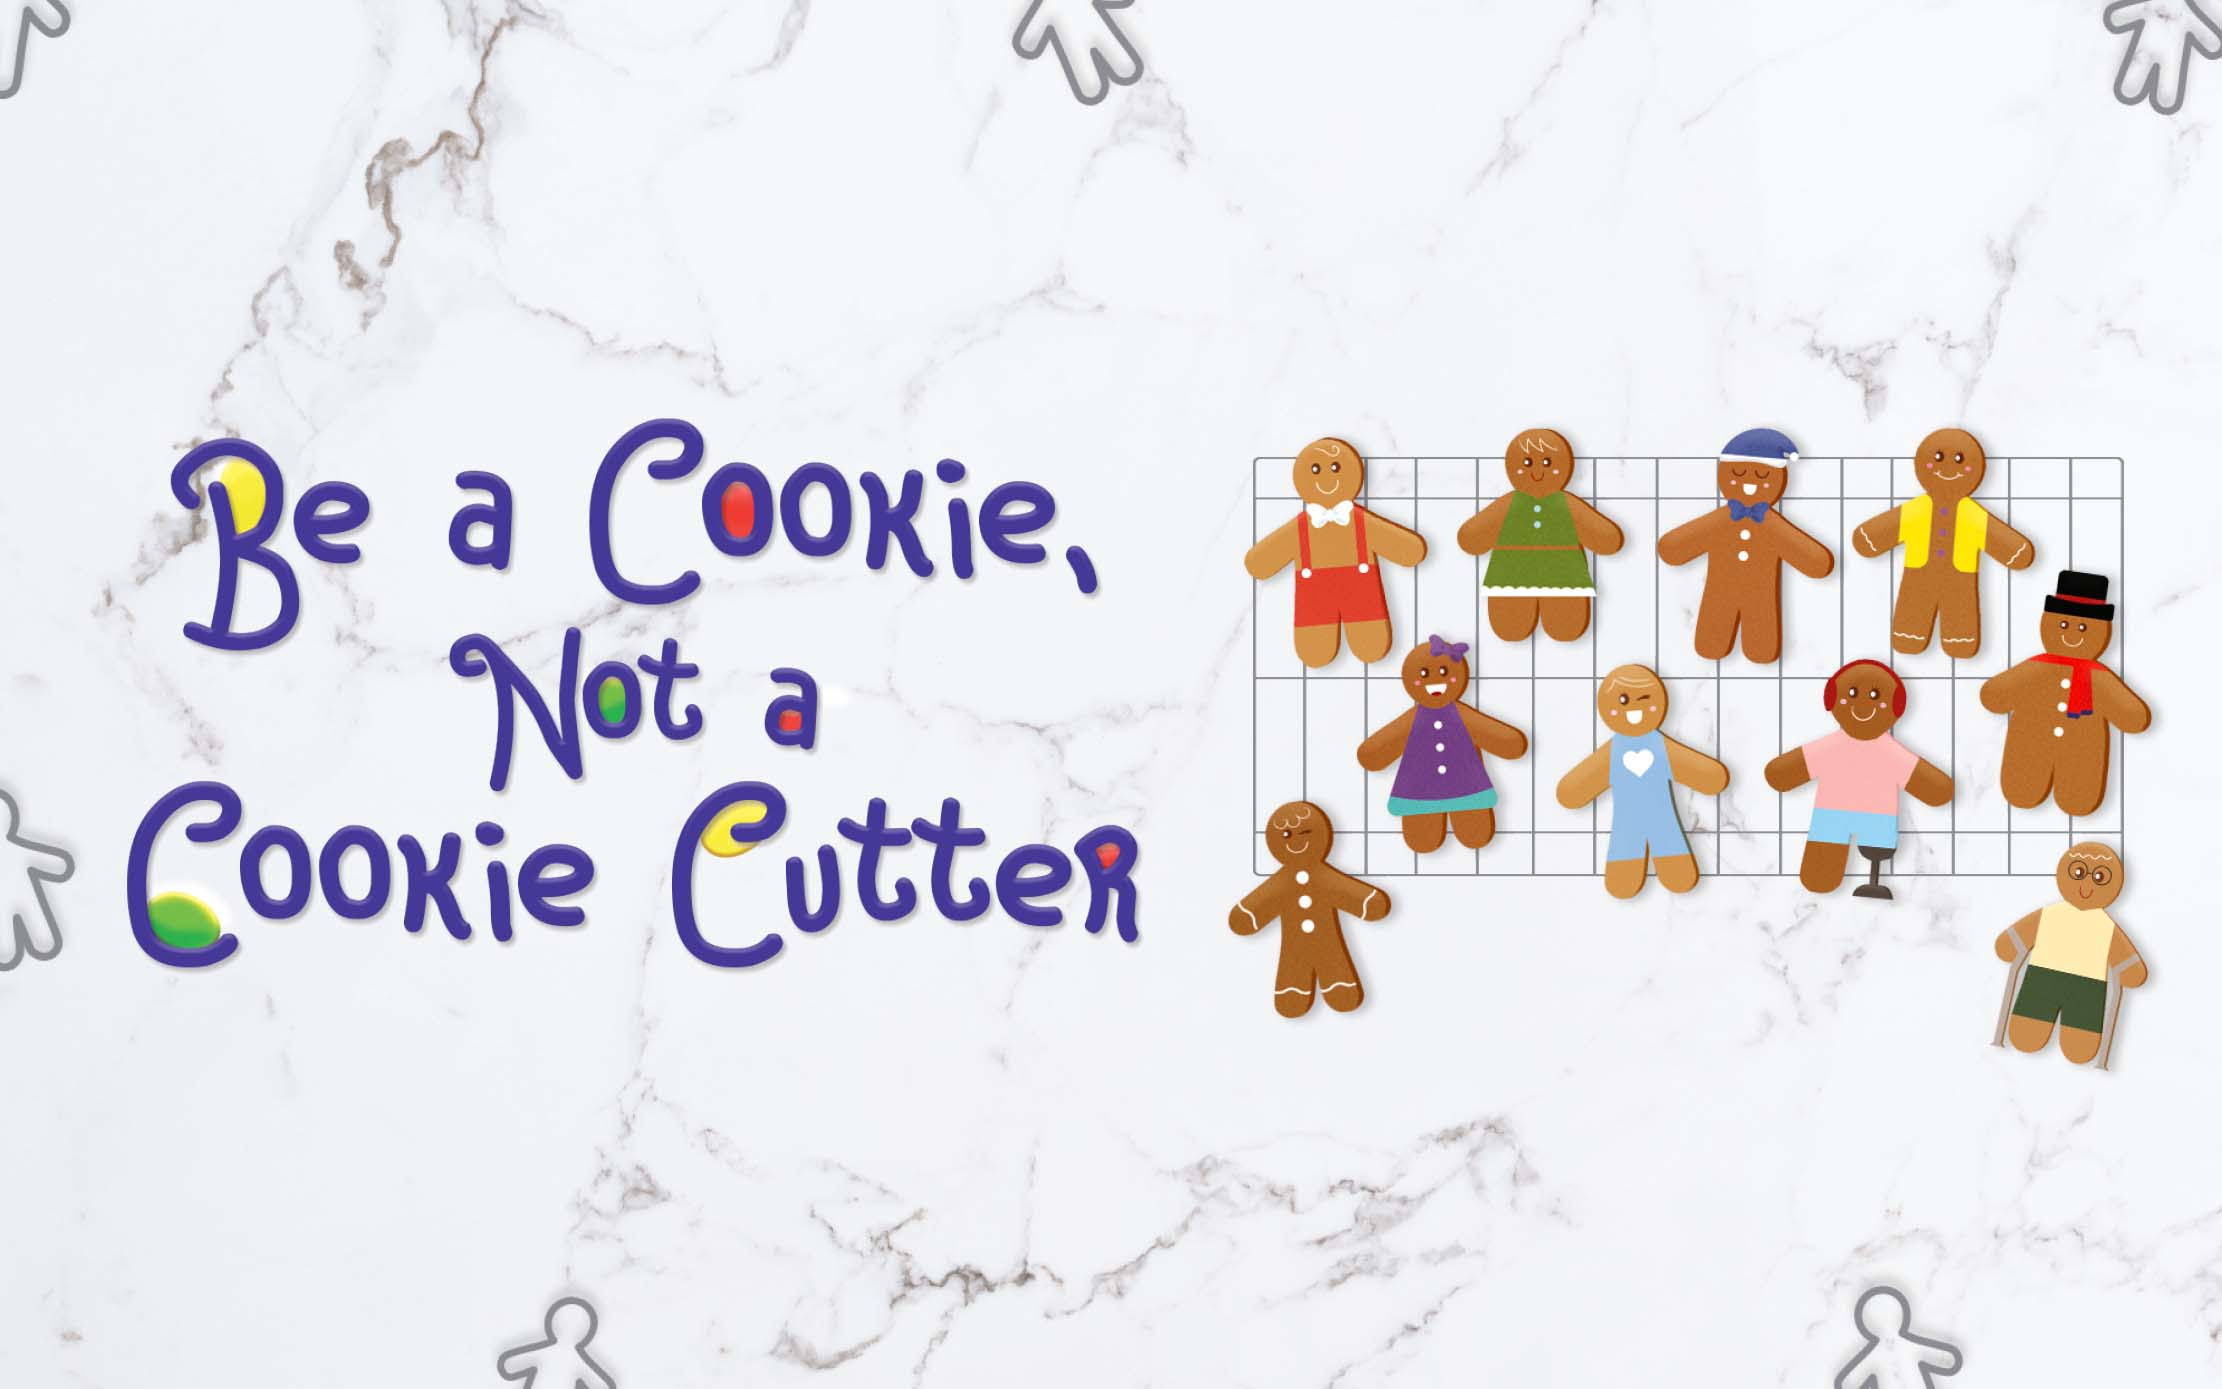  Be a Cookie, Not a Cookie Cutter